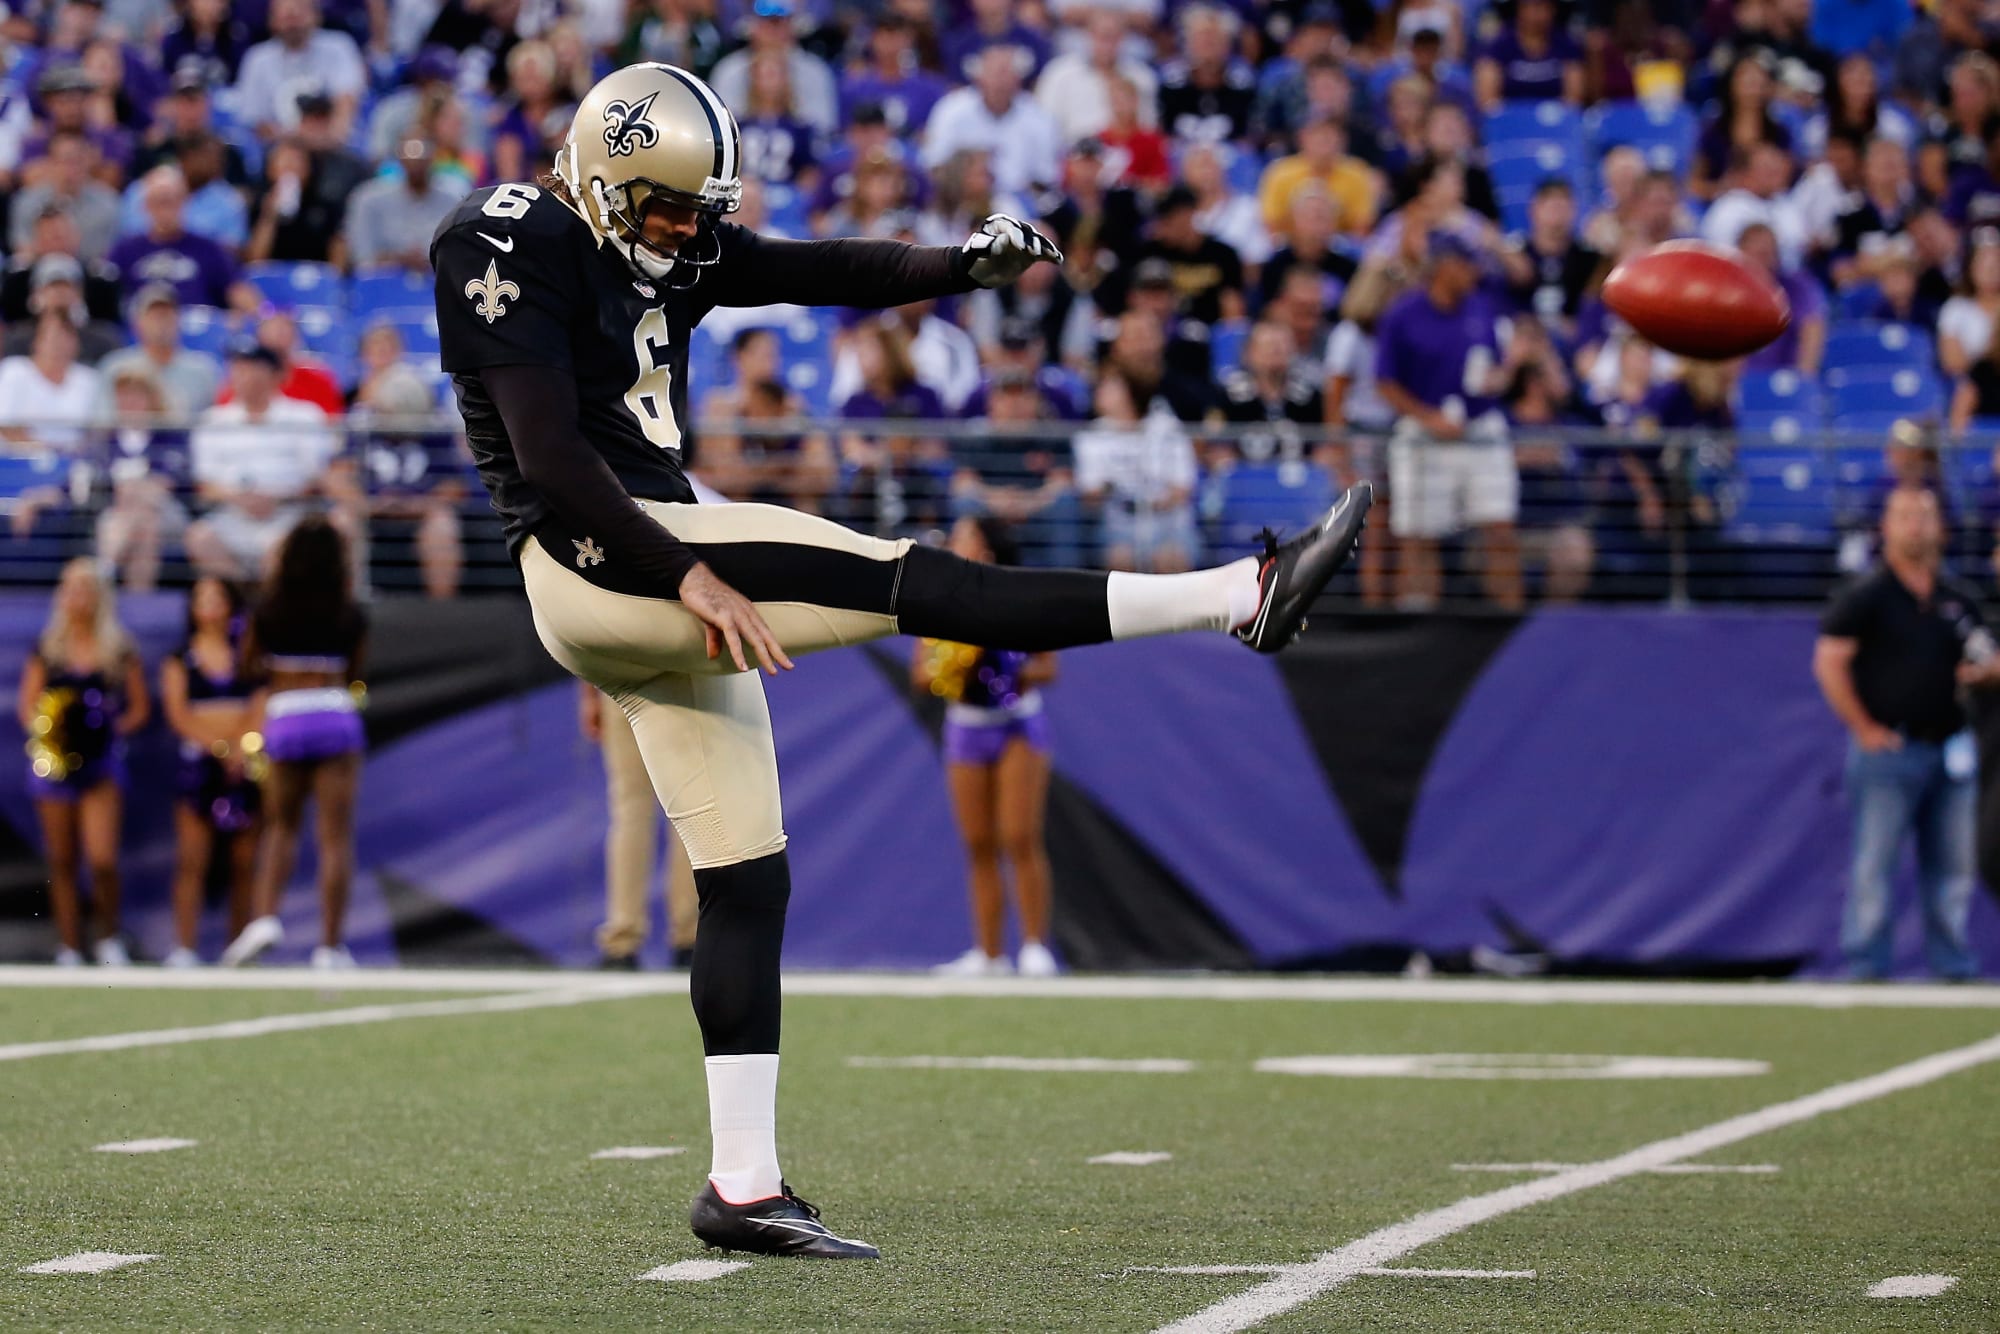 Saints punter is on pace to break a record that has stood for 76 years